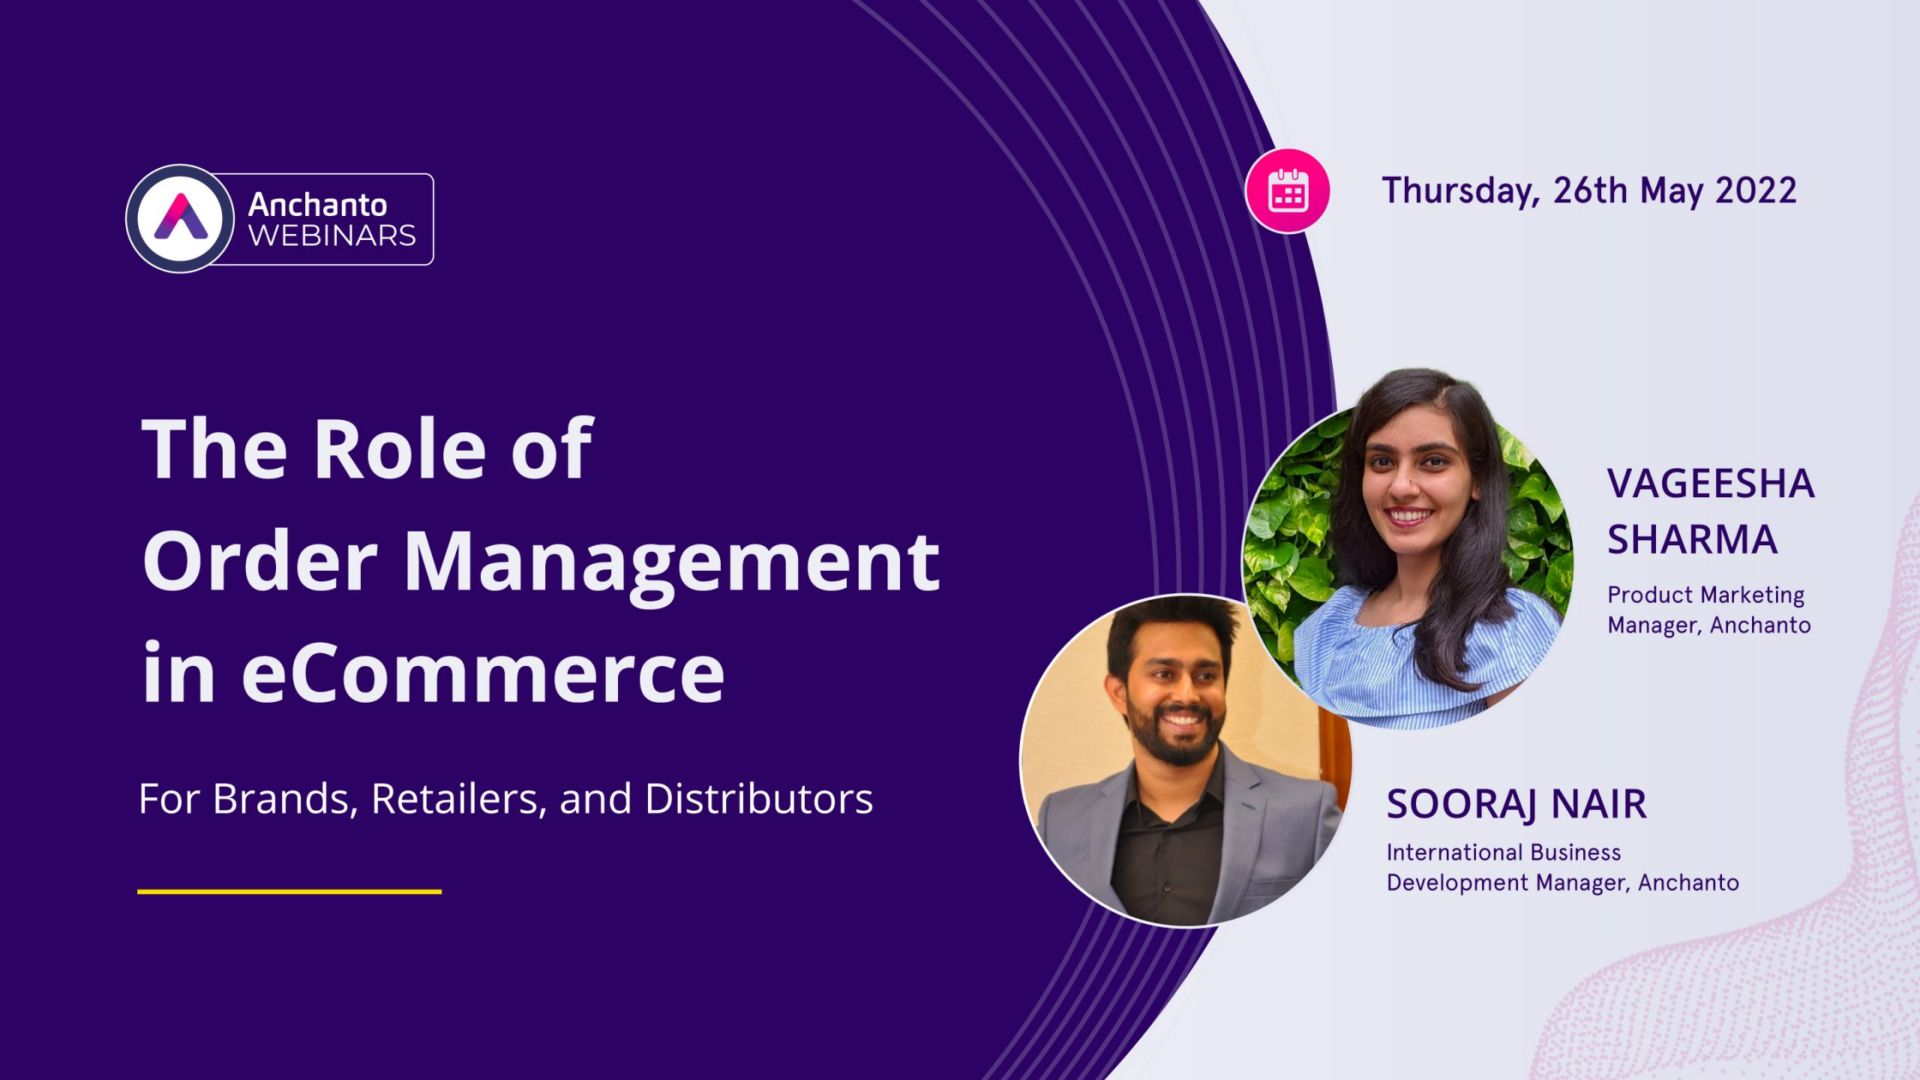 The Role of Order Management in eCommerce for Brands, Retailers, and Distributors